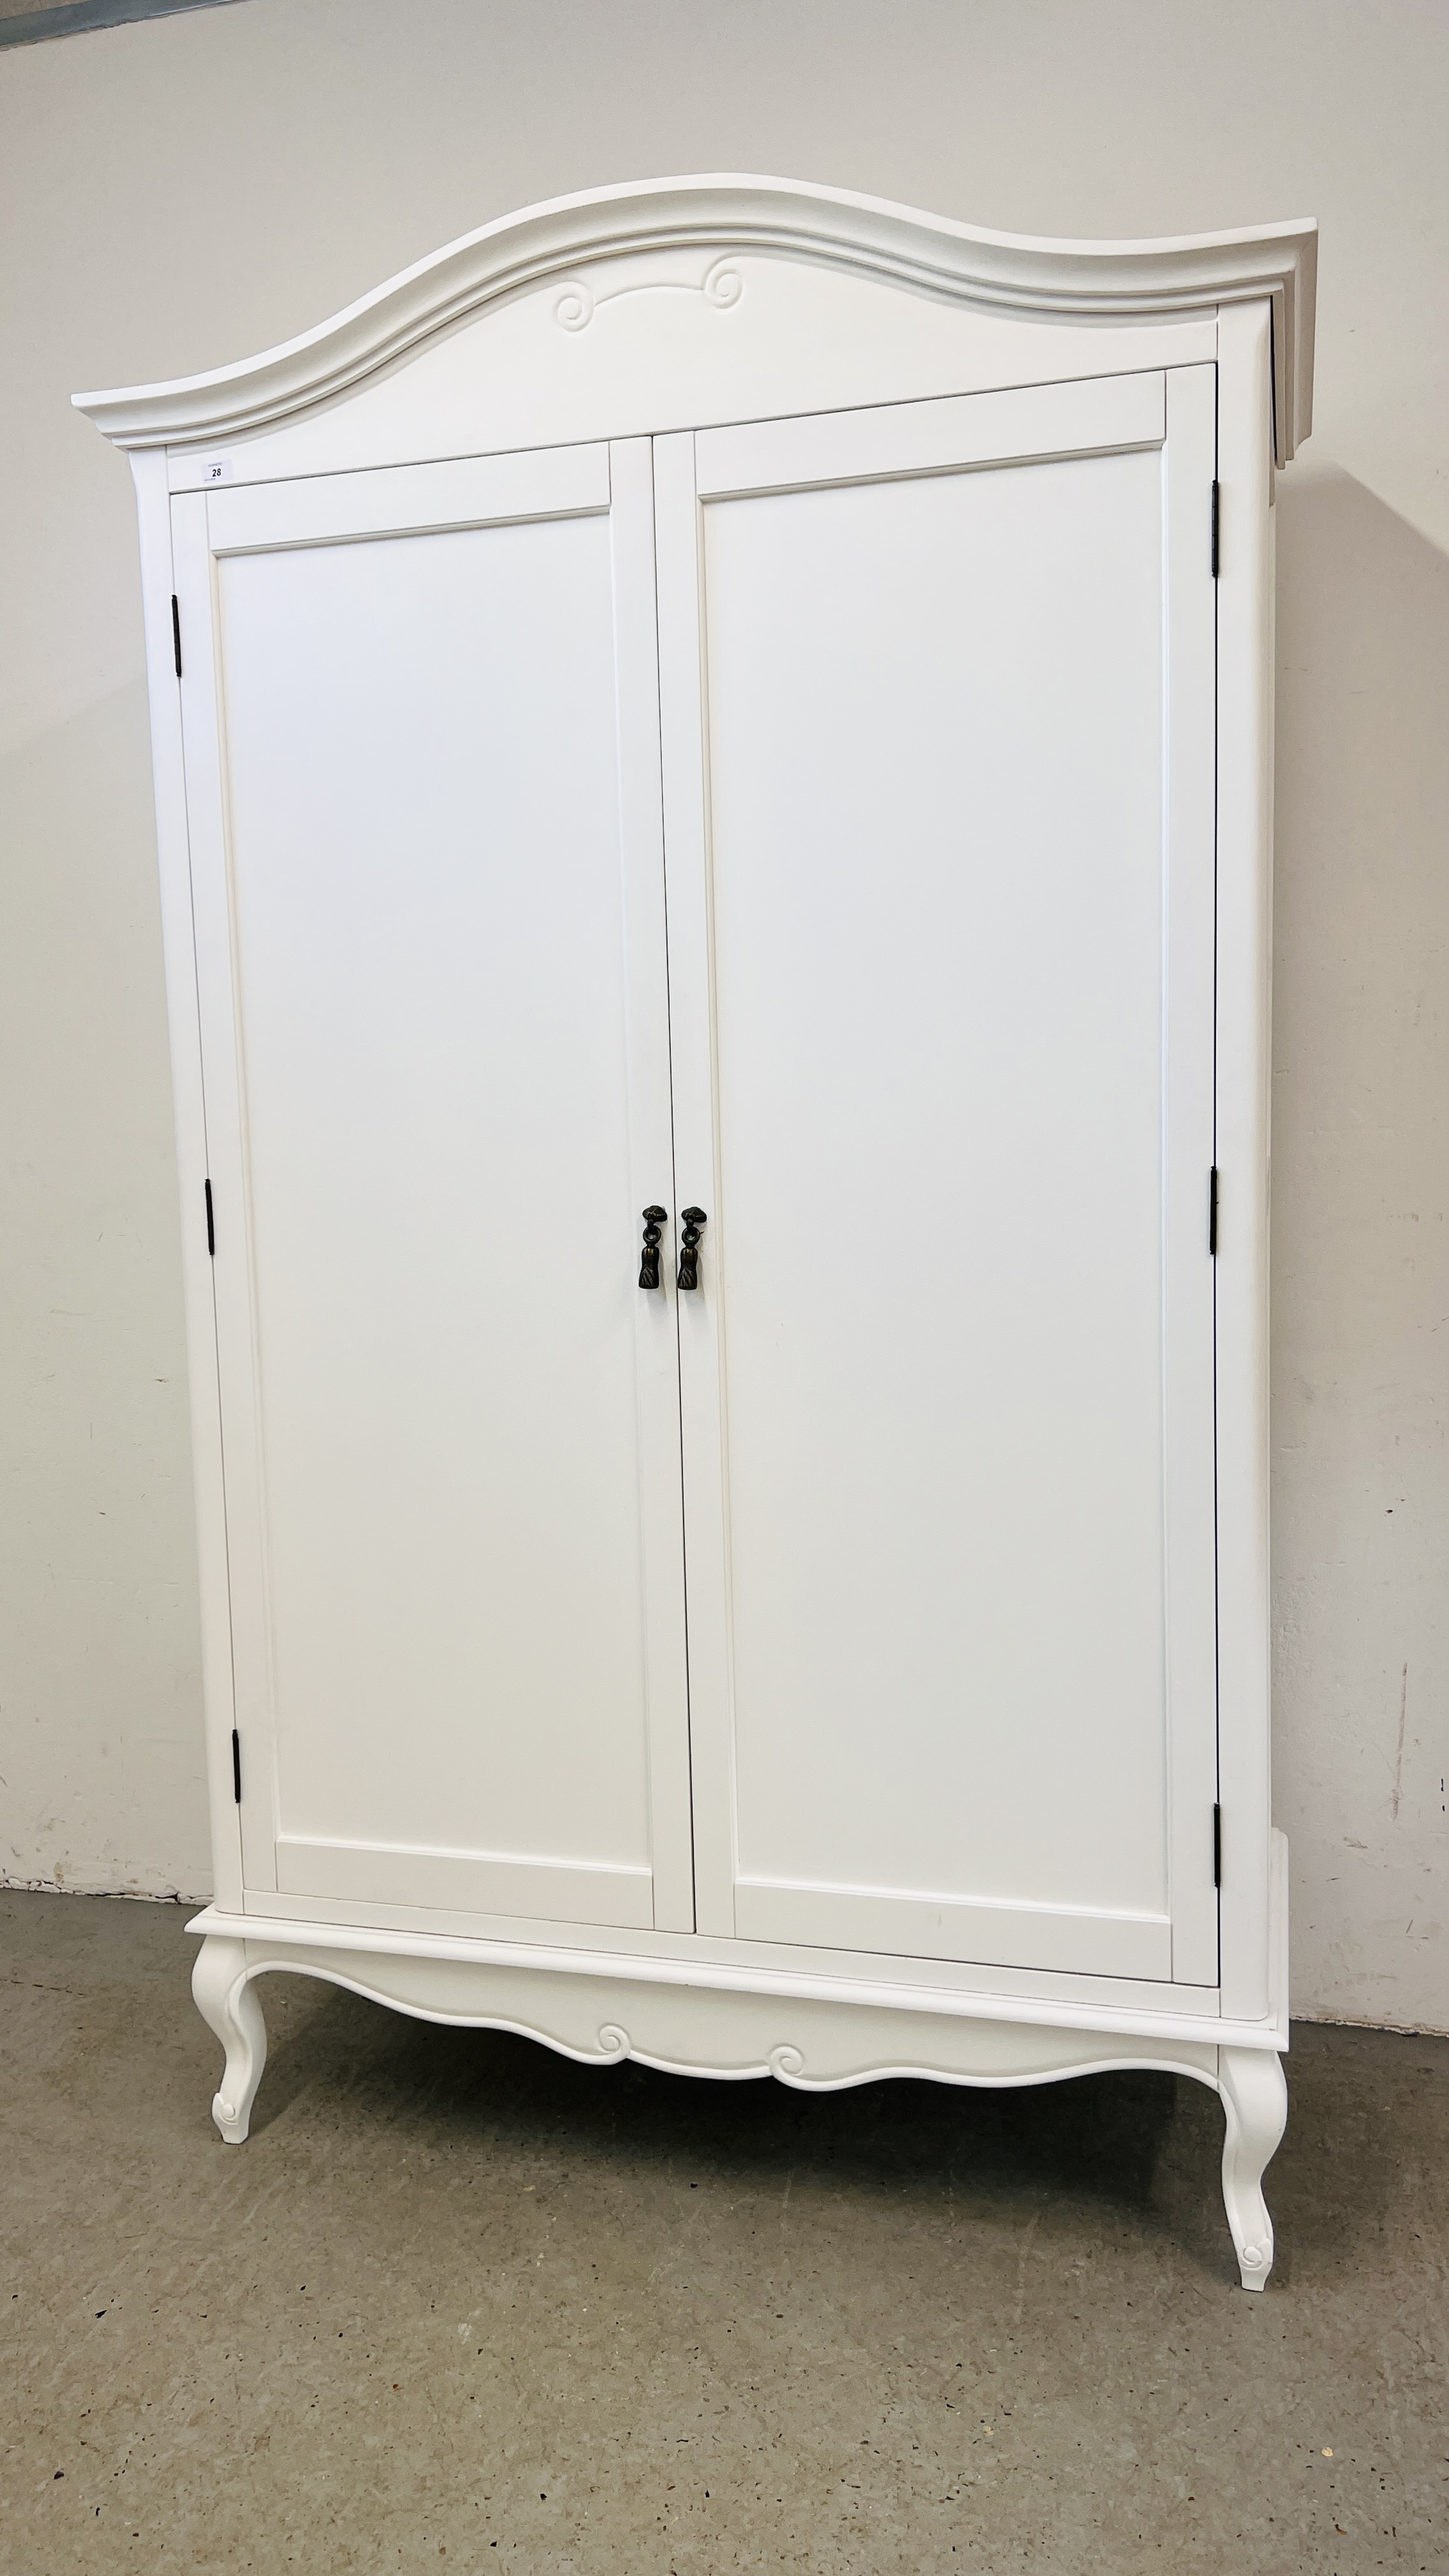 A GOOD QUALITY FRENCH STYLE WHITE FINISH TWO DOOR WARDROBE WITH INTERIOR CLOTHES RAIL AND SHELF W